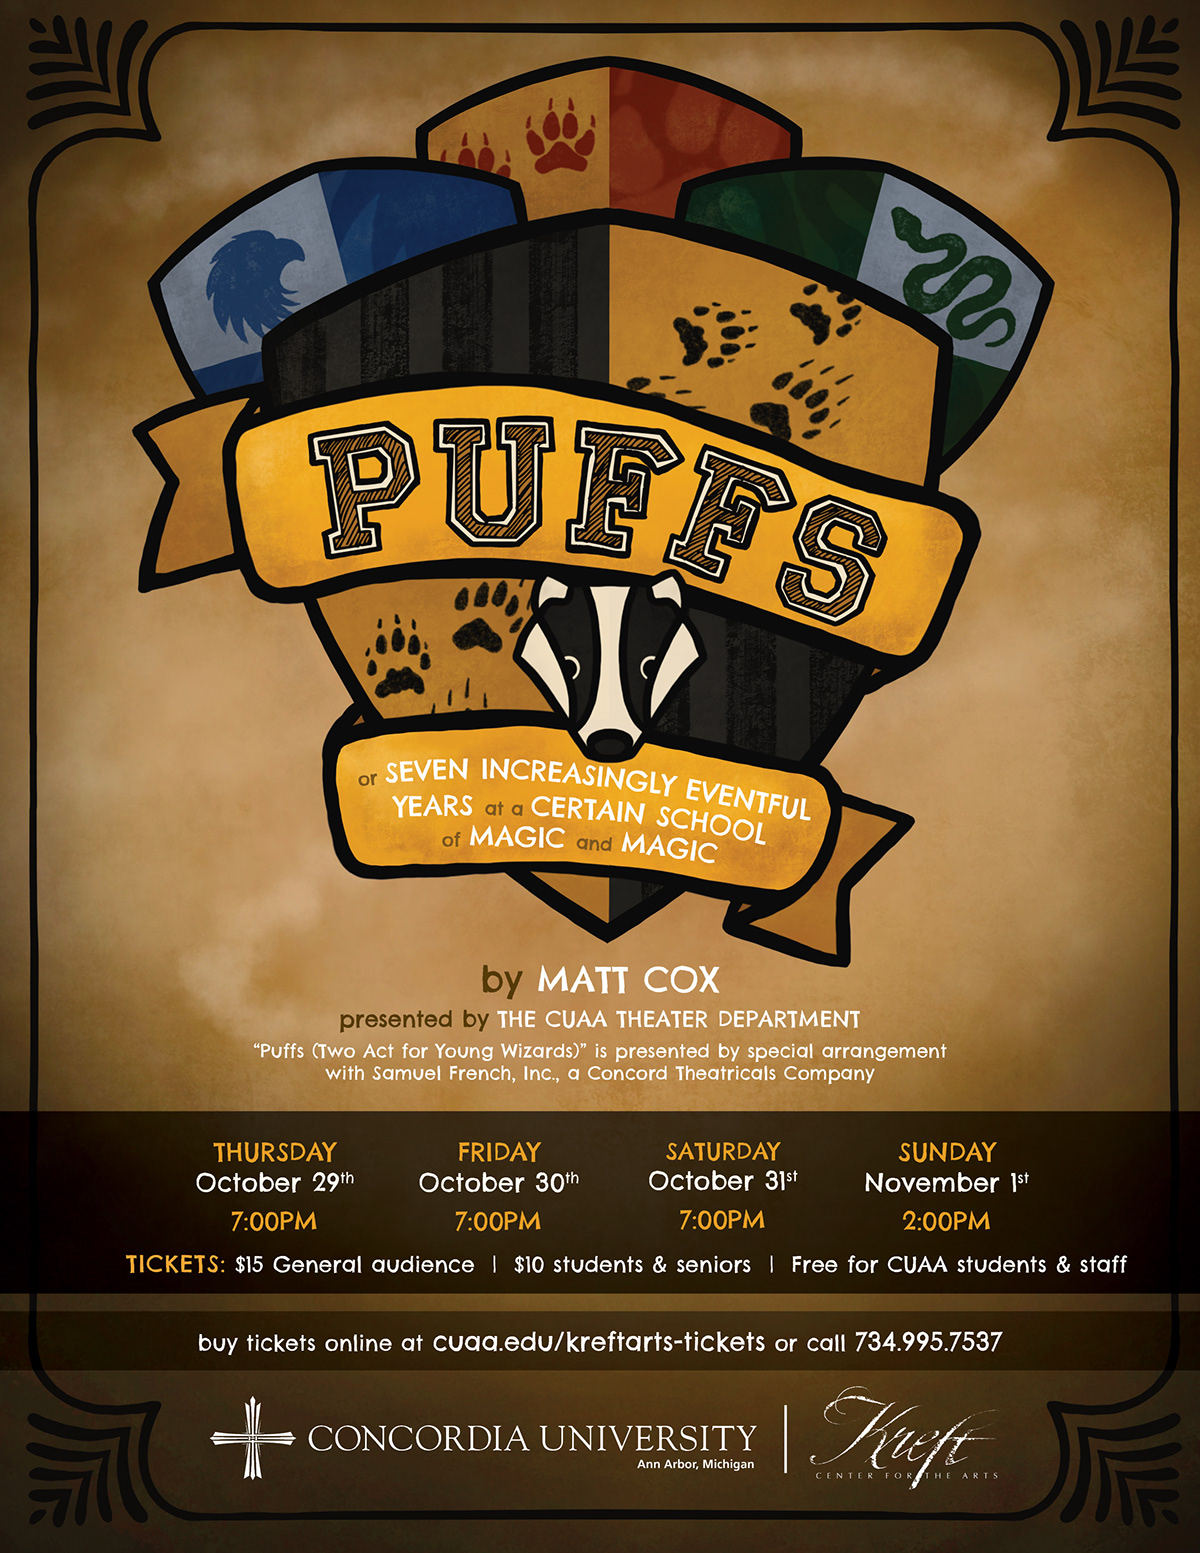 Illustrated Puffs poster showing the four house shields complete with house animals and colors.